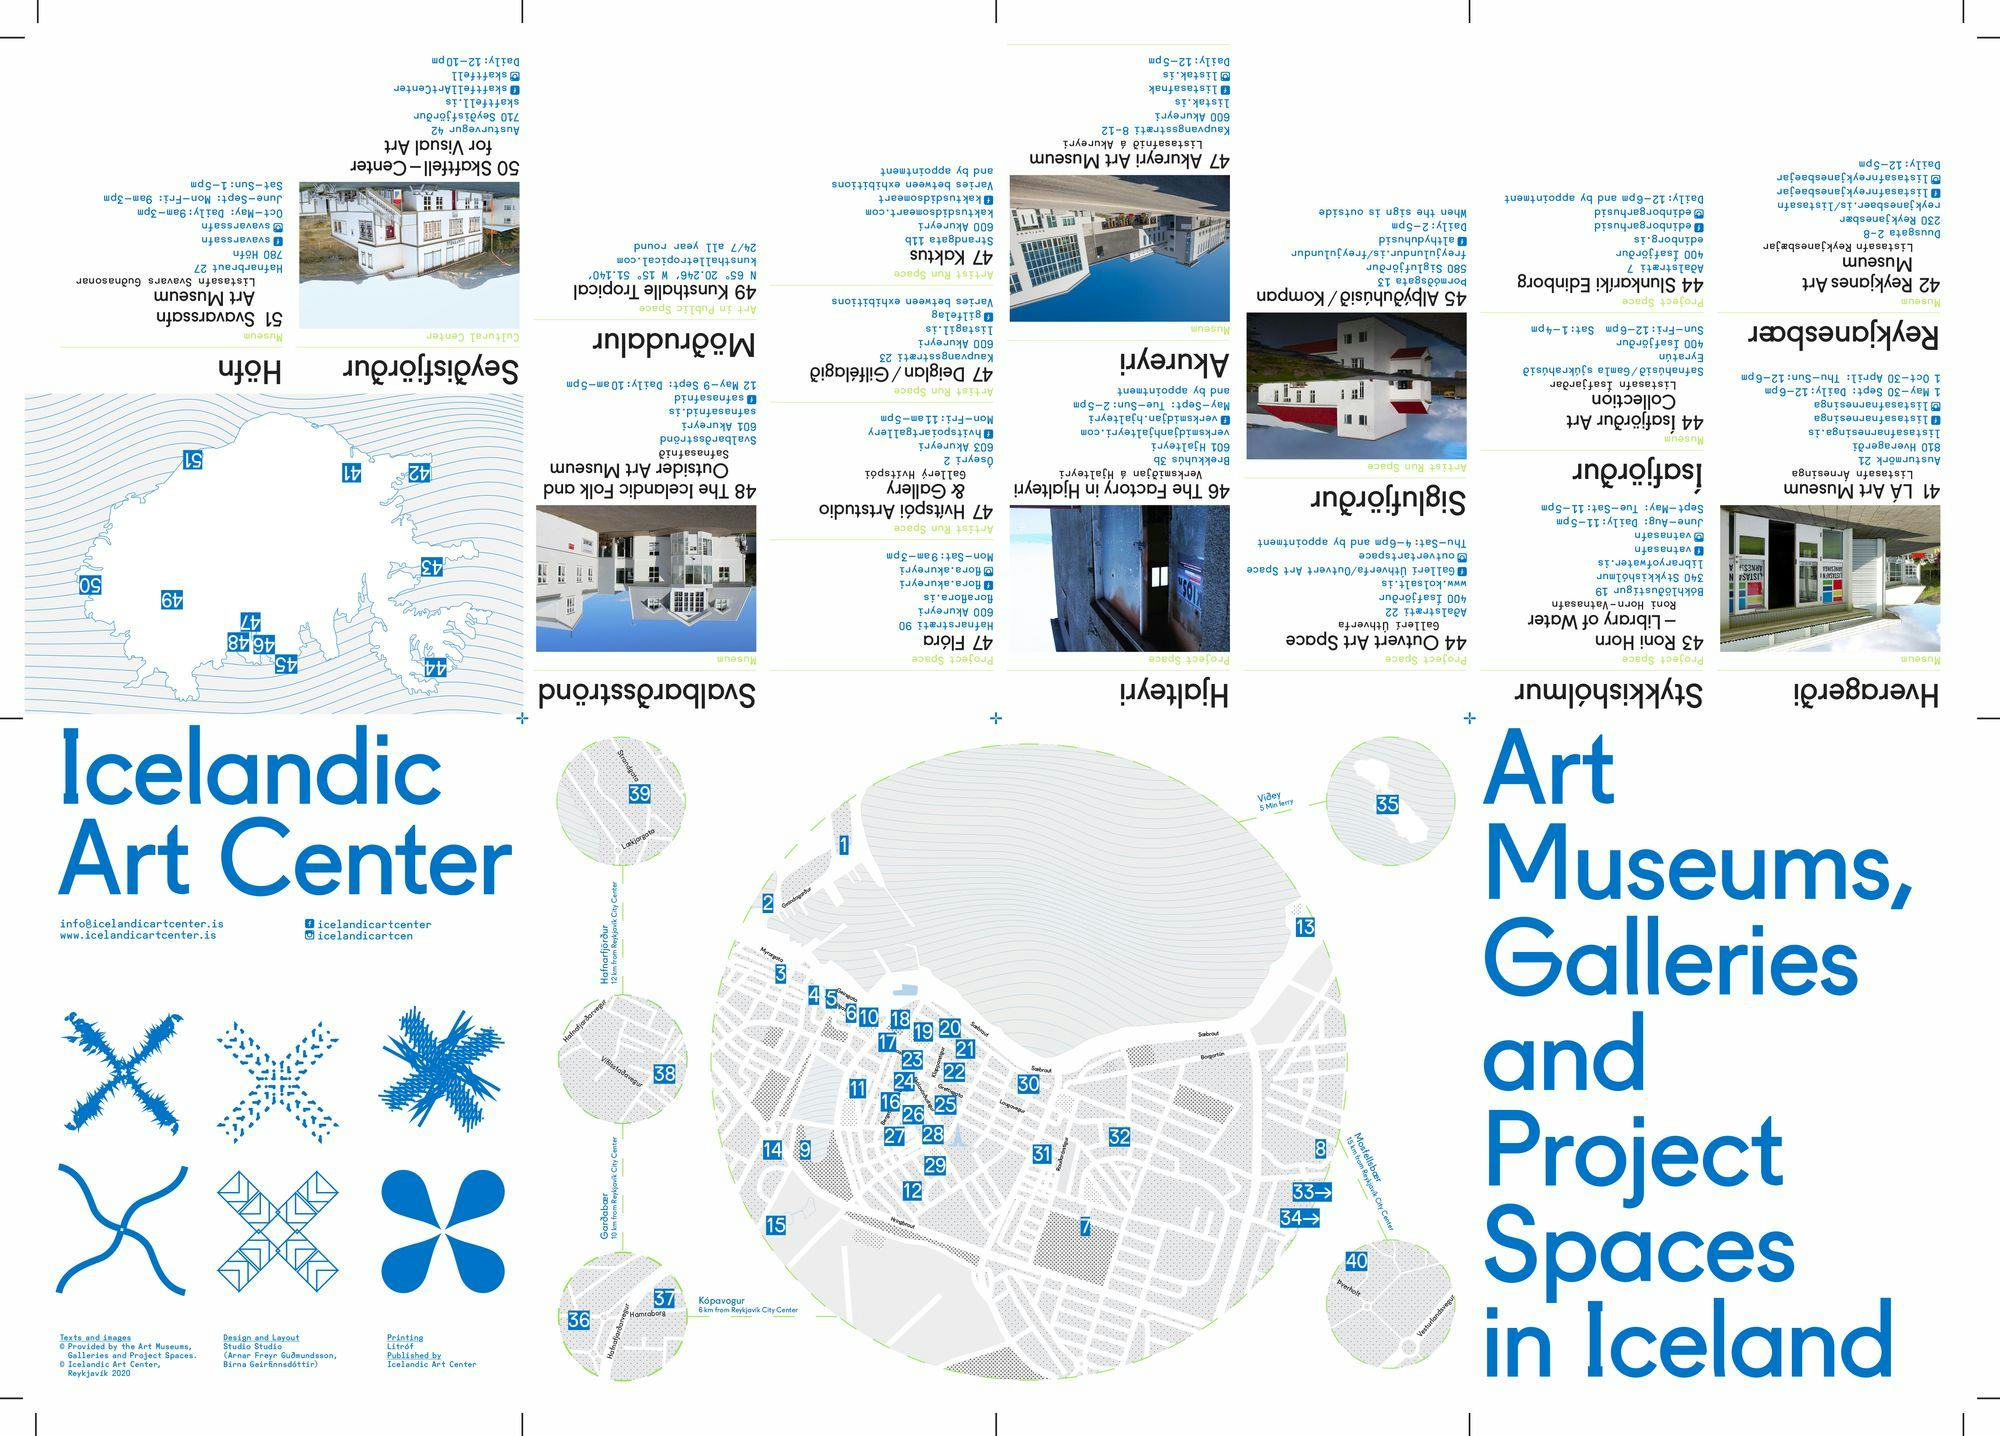 Art Museums, Galleries and Project Spaces in Iceland